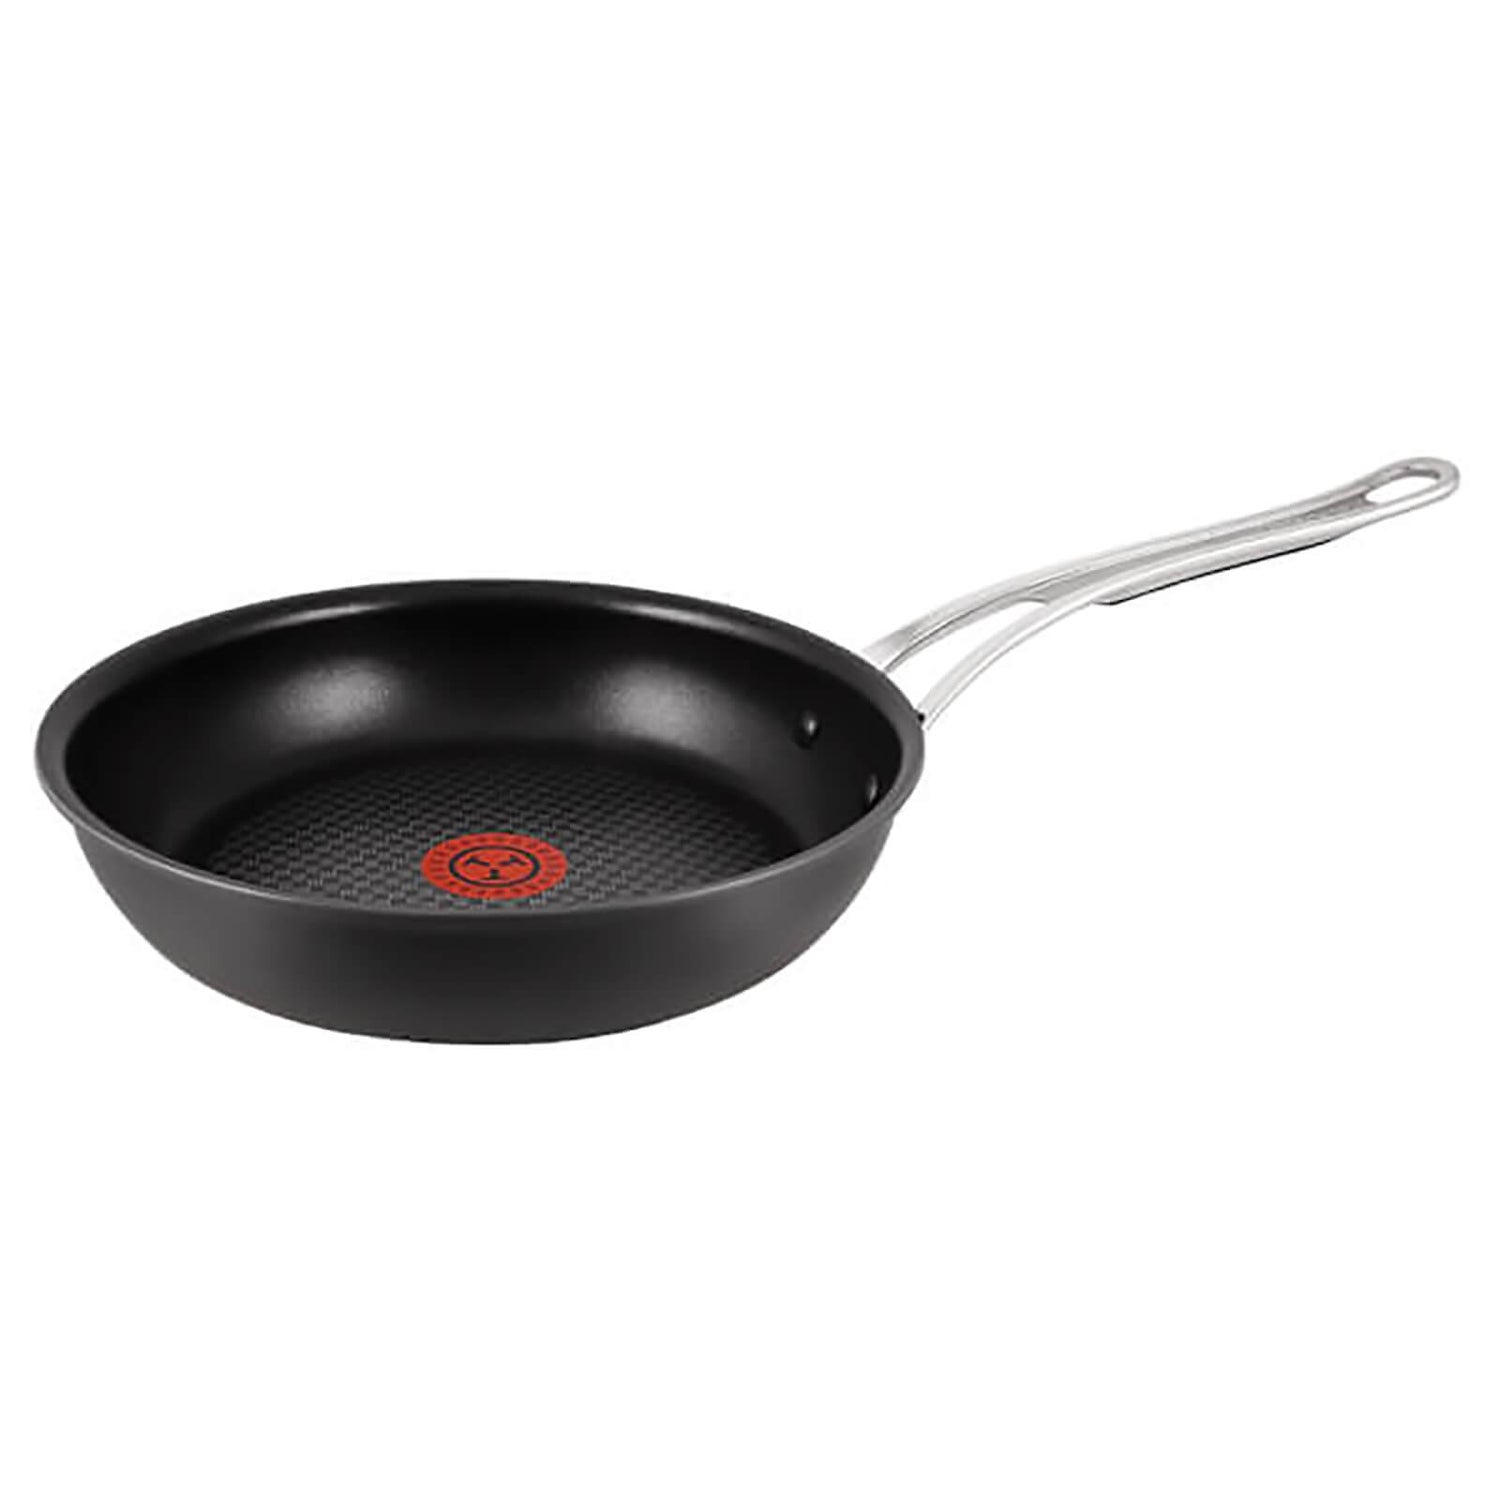 Jamie Oliver by Tefal Hard Anodised Homeware US - Zavvi - Pan 28cm Frying Non-Stick